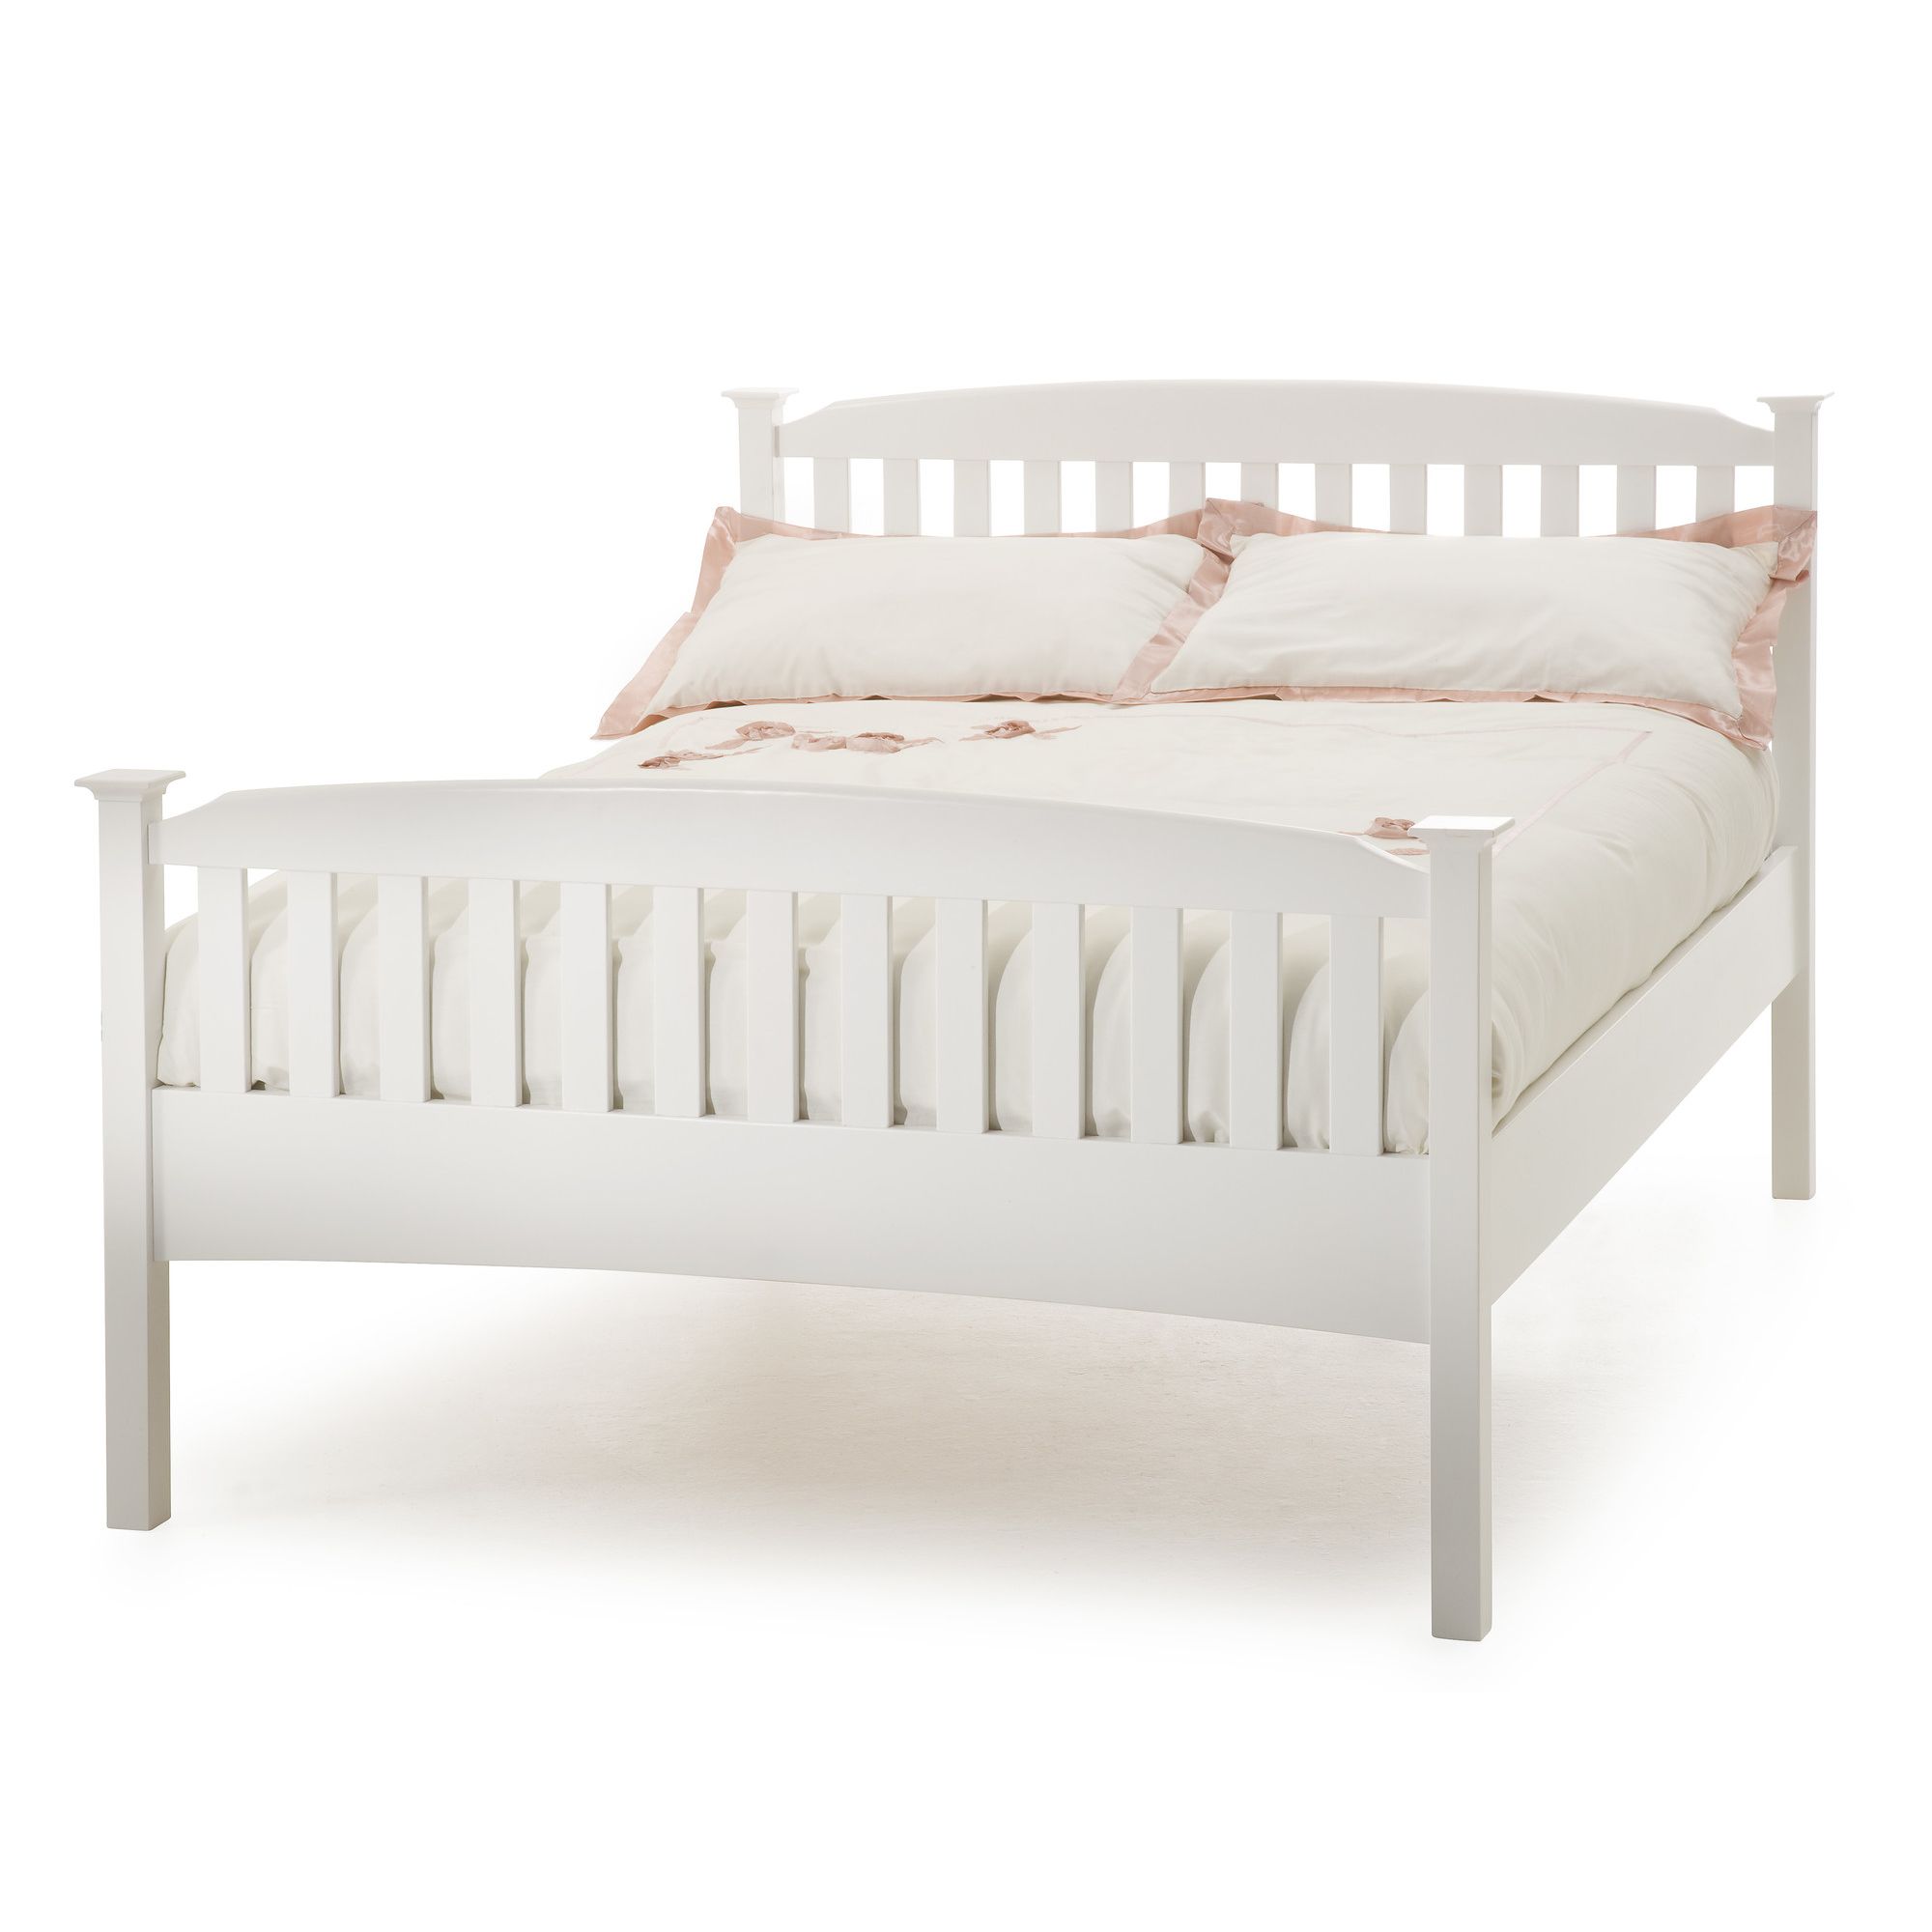 Serene Furnishings Eleanor High Foot End Bed - Honey Oak - Small Double at Tesco Direct